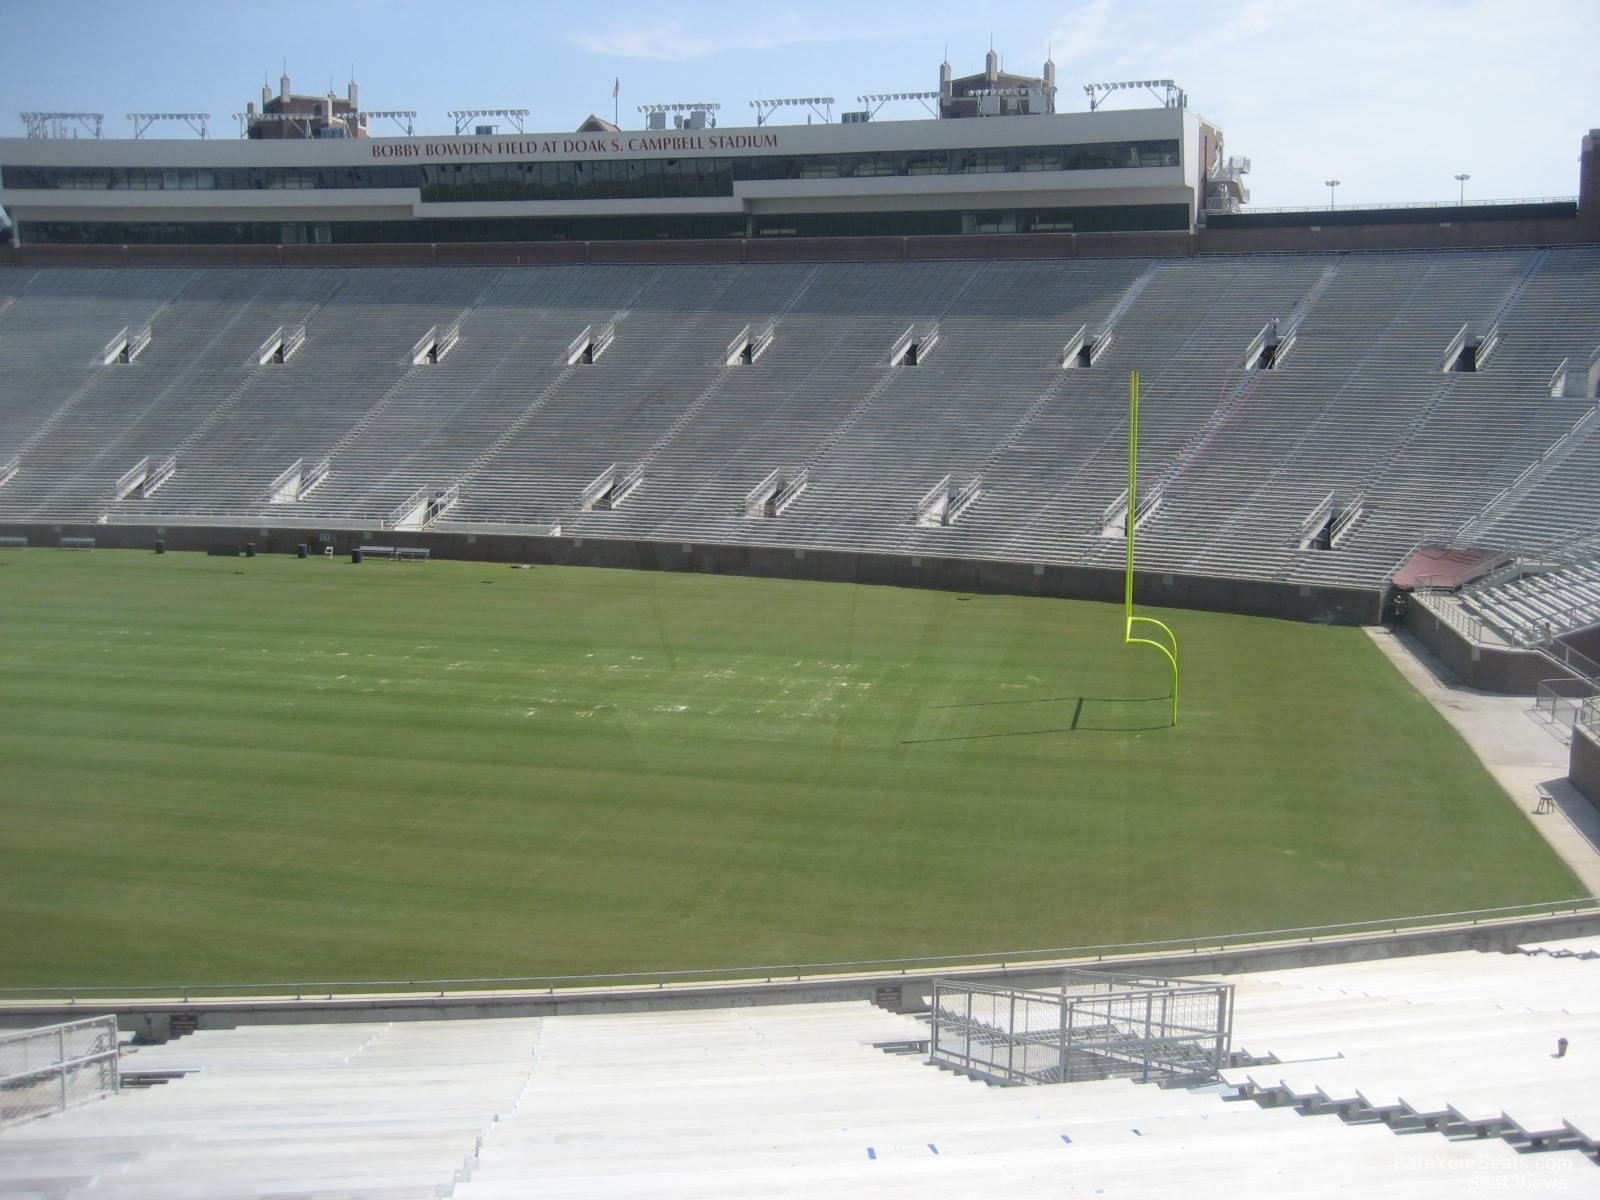 Doak Campbell Interactive Seating Chart